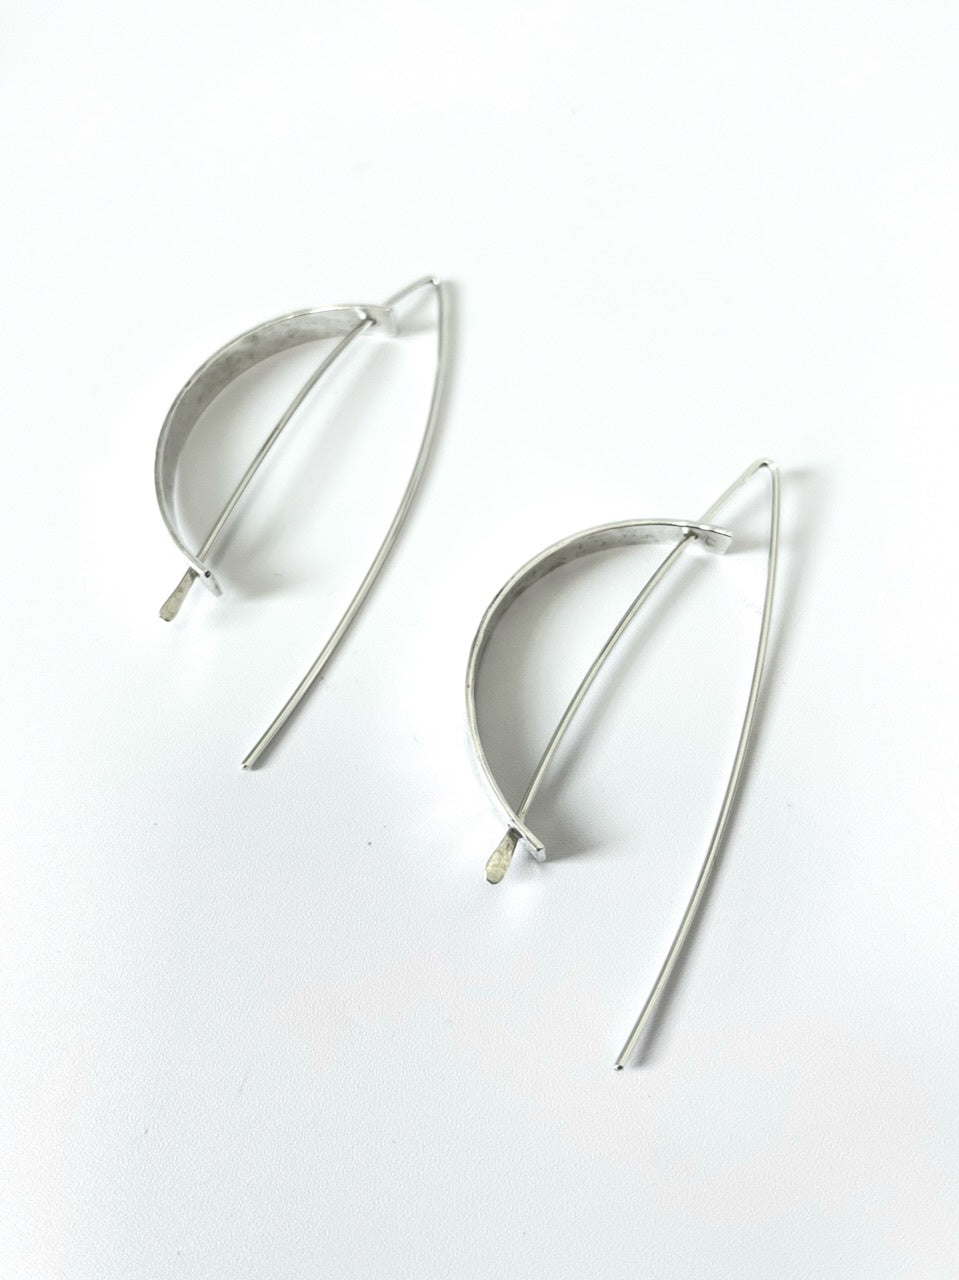 Silver Textured Crescent Shape Earrings